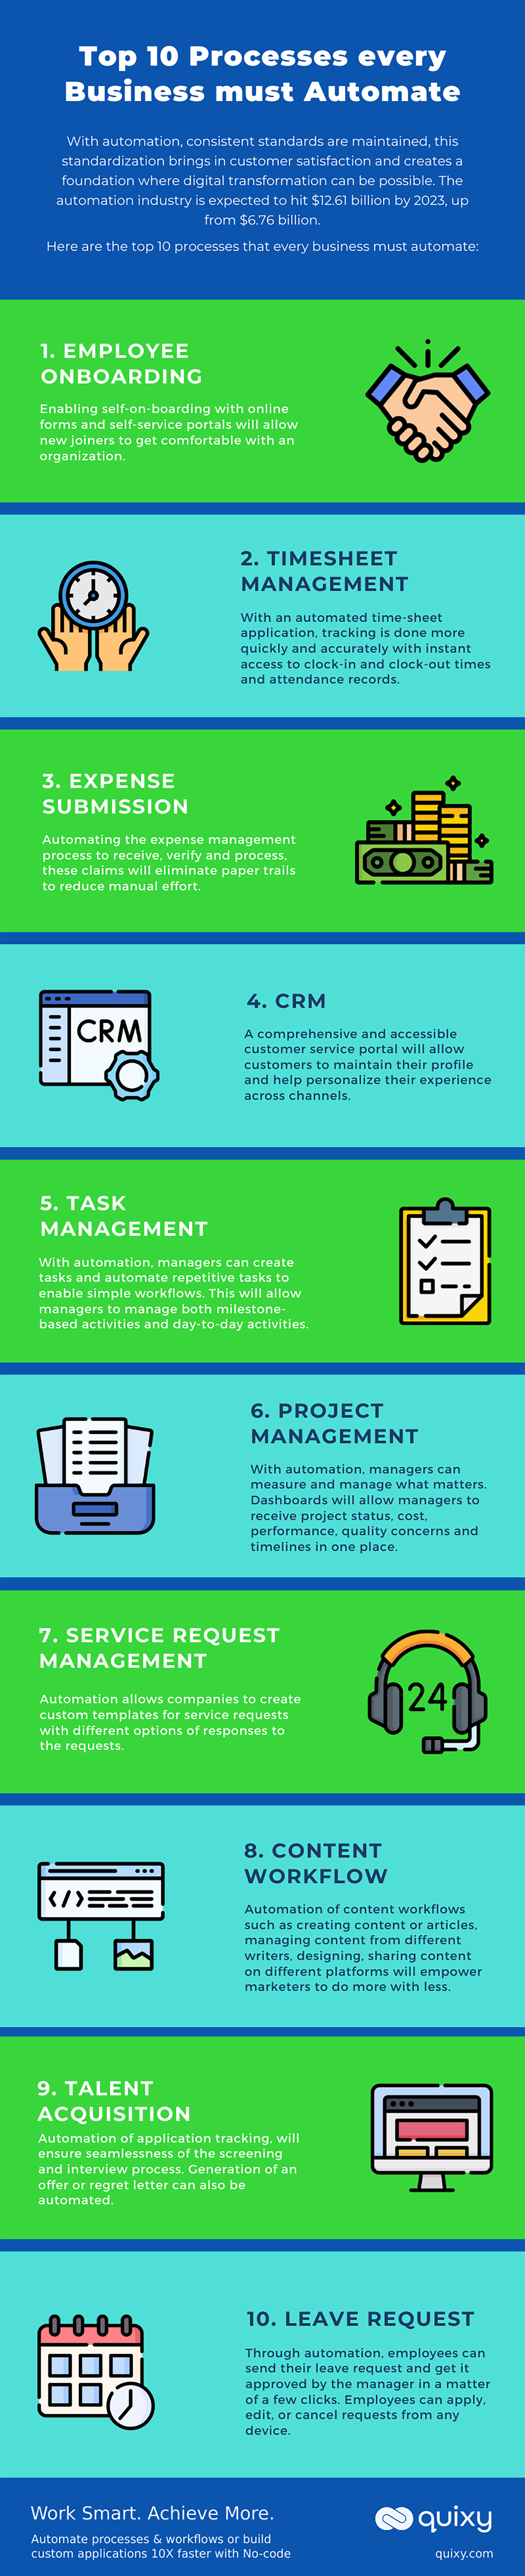 Top 10 Processes every business must automate Infographic